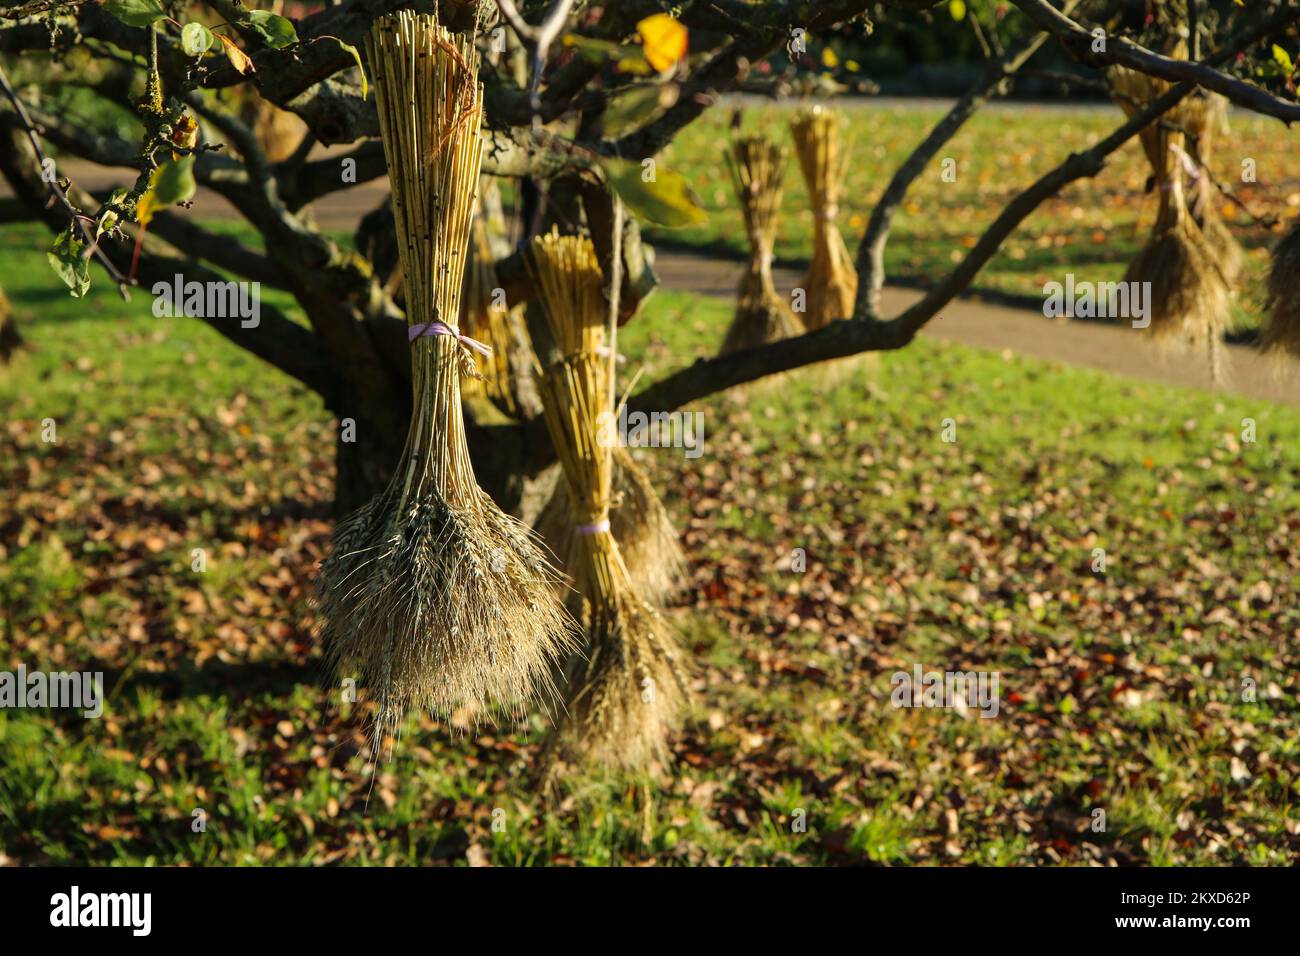 The detail of many sheaves of grains hanging on the tree branches as an autumn rural decoration. Stock Photo